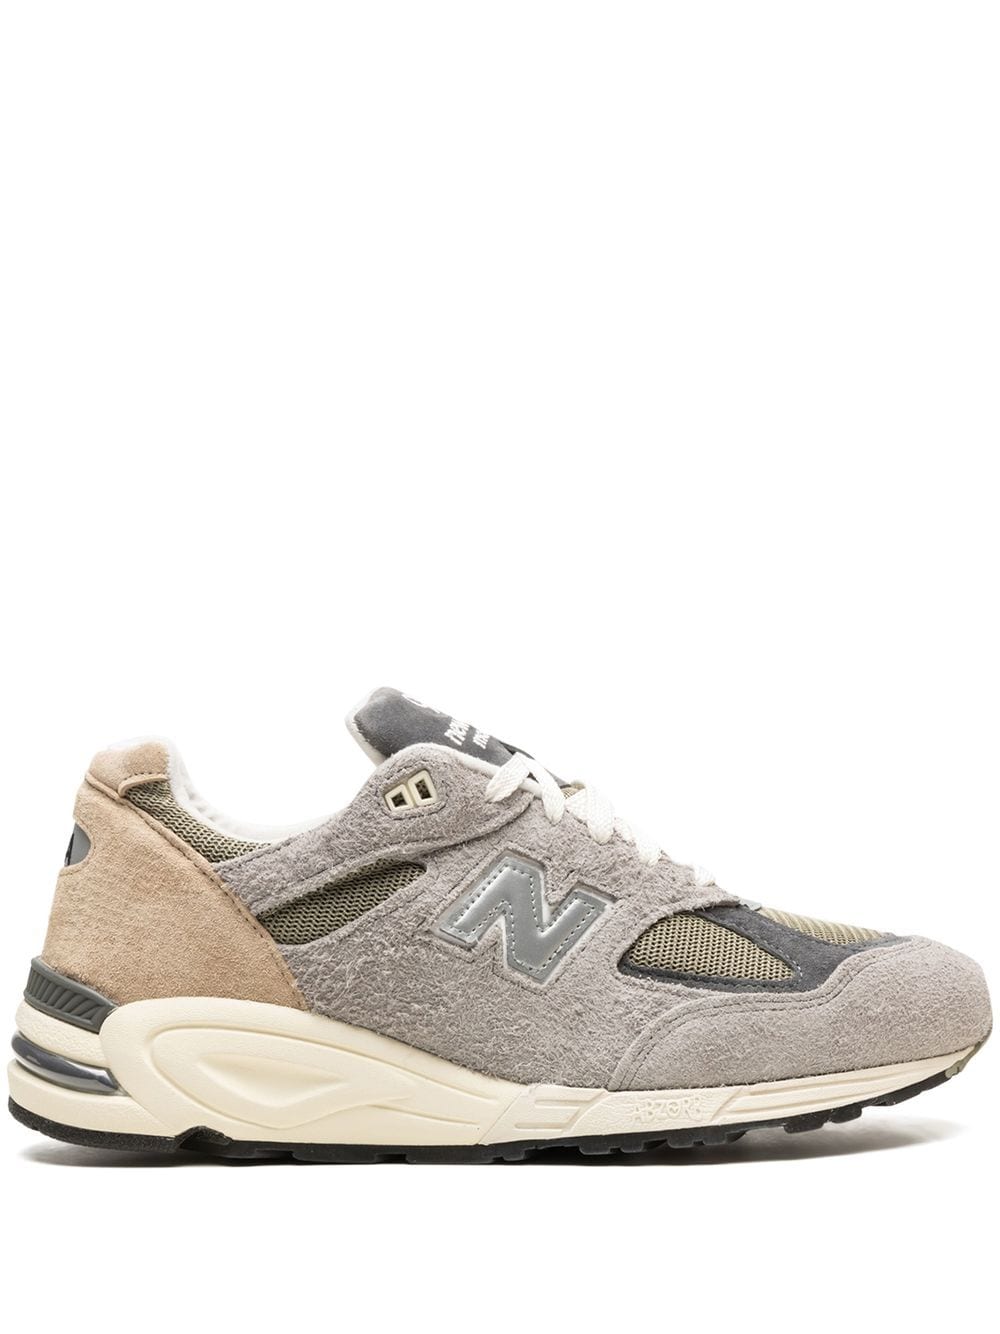 New Balance x Teddy Santis 990 V2 "Made in the USA" sneakers - Neutrals